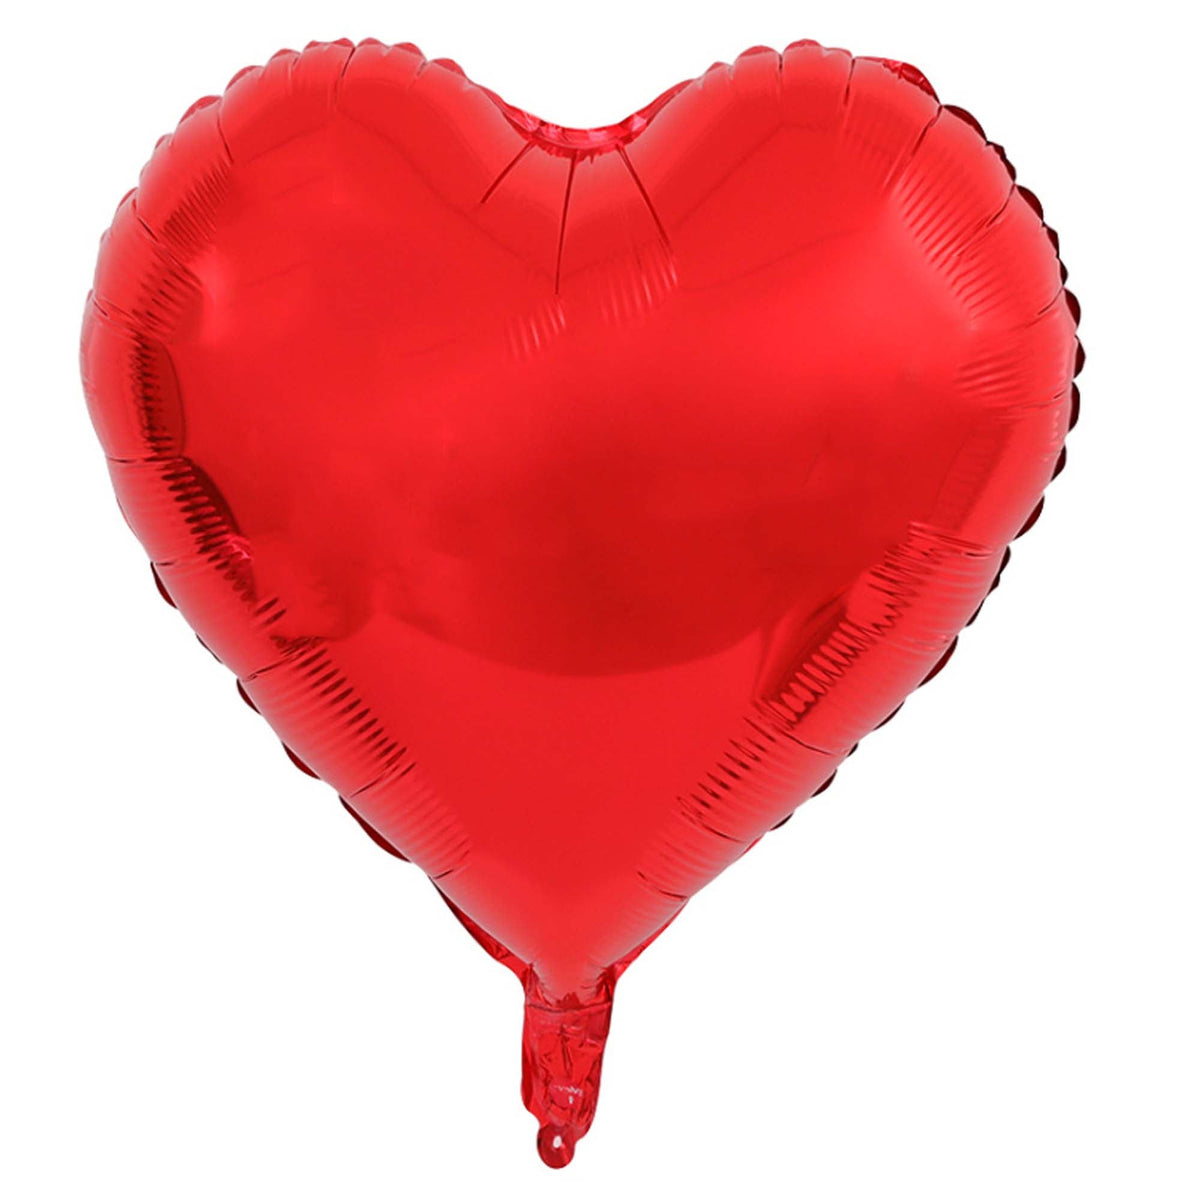 BOOMBA INTERNATIONAL TRADING CO,. LTD Balloons Metallic Red Heart Shaped Foil Balloon, 18 Inches, 1 Count